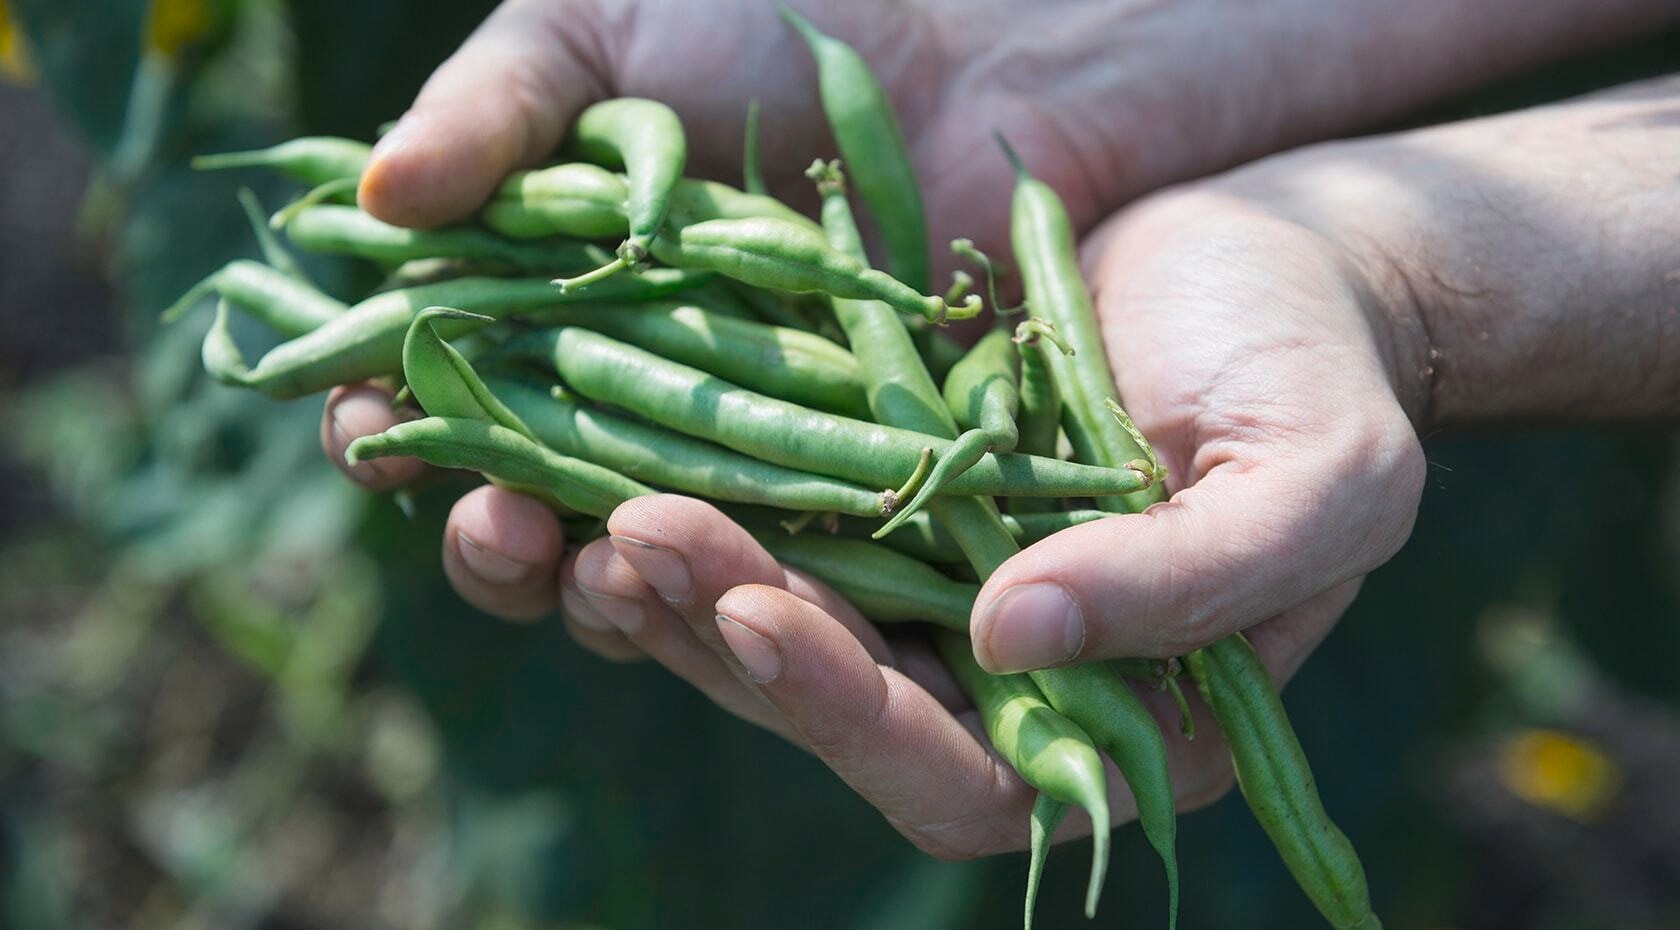 A person holding beans in hand